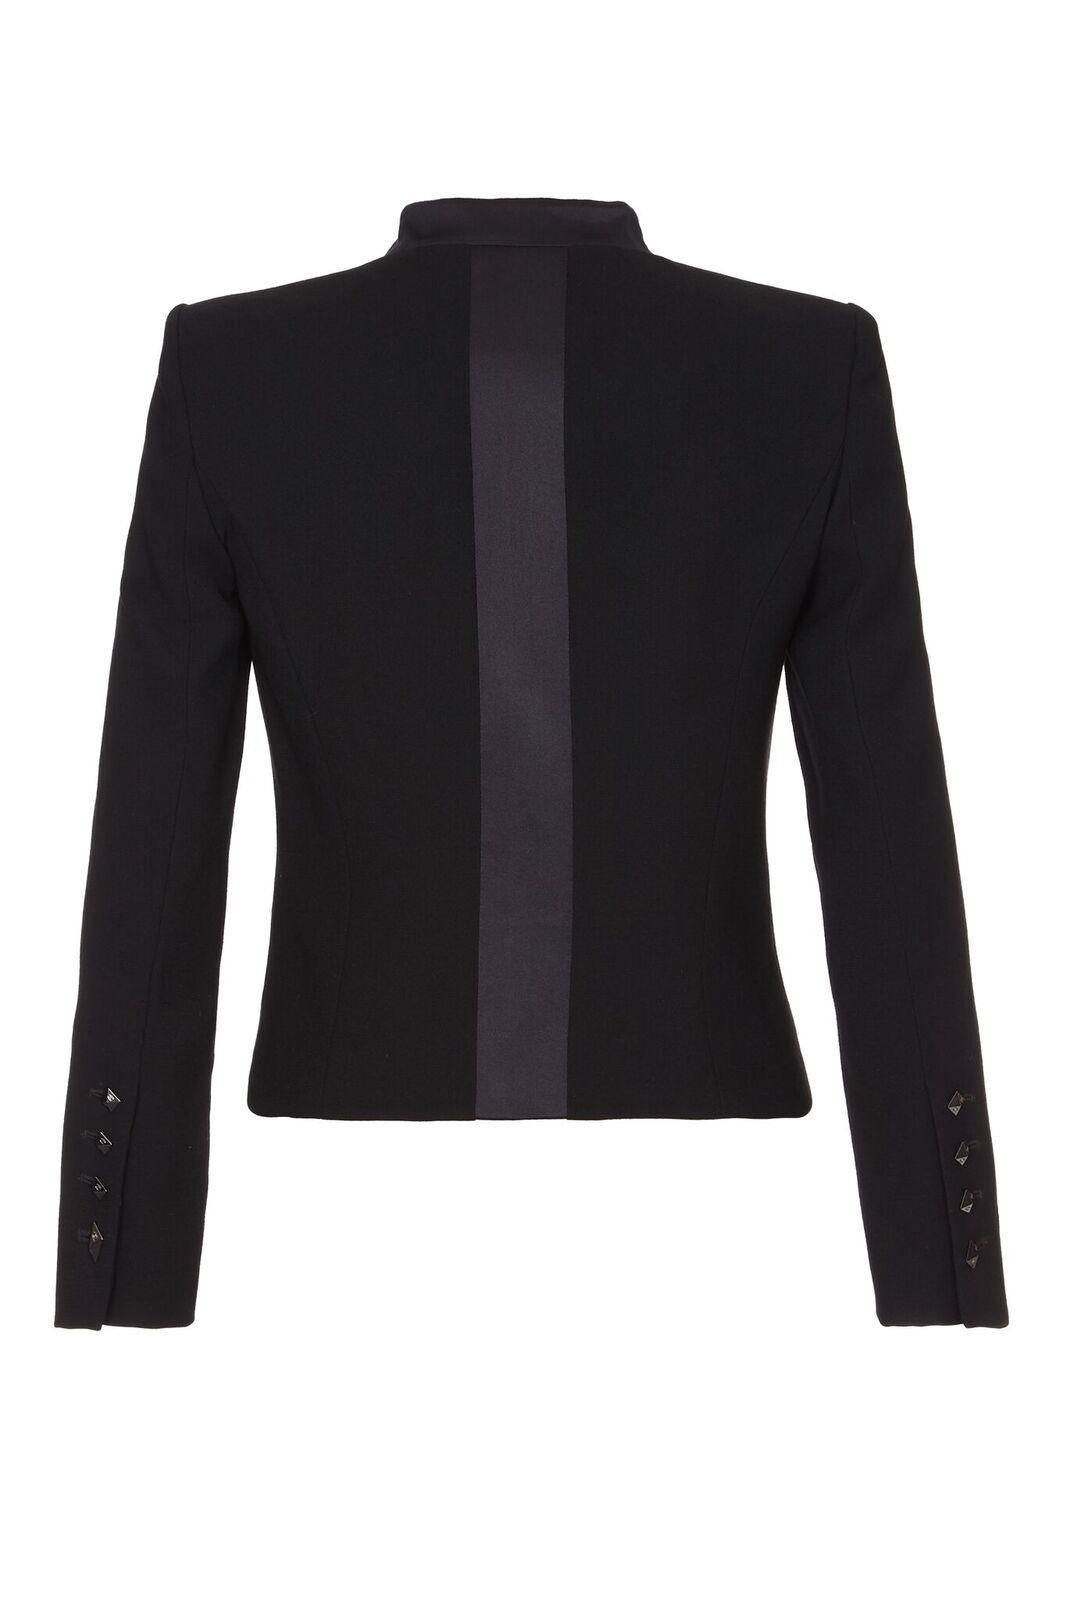 This Chanel black silk crepe jacket circa 2003 is of exceptional quality. The modernity and simplicity of the line is sharp and chic as well as feminine. The flat lapel is of silk satin to contrast with the mat texture of the lightweight crepe and